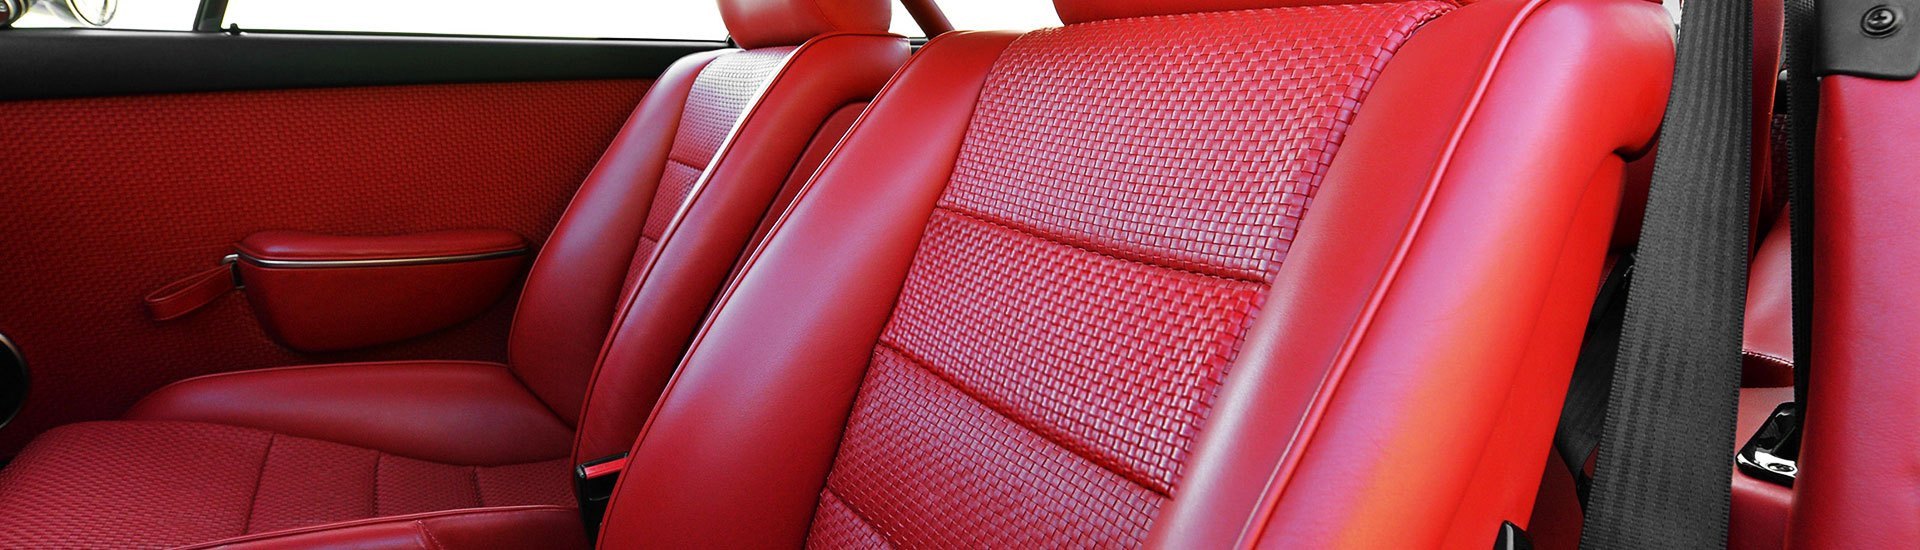 Classic Car Seats Finish Your Interior Restoration In Style